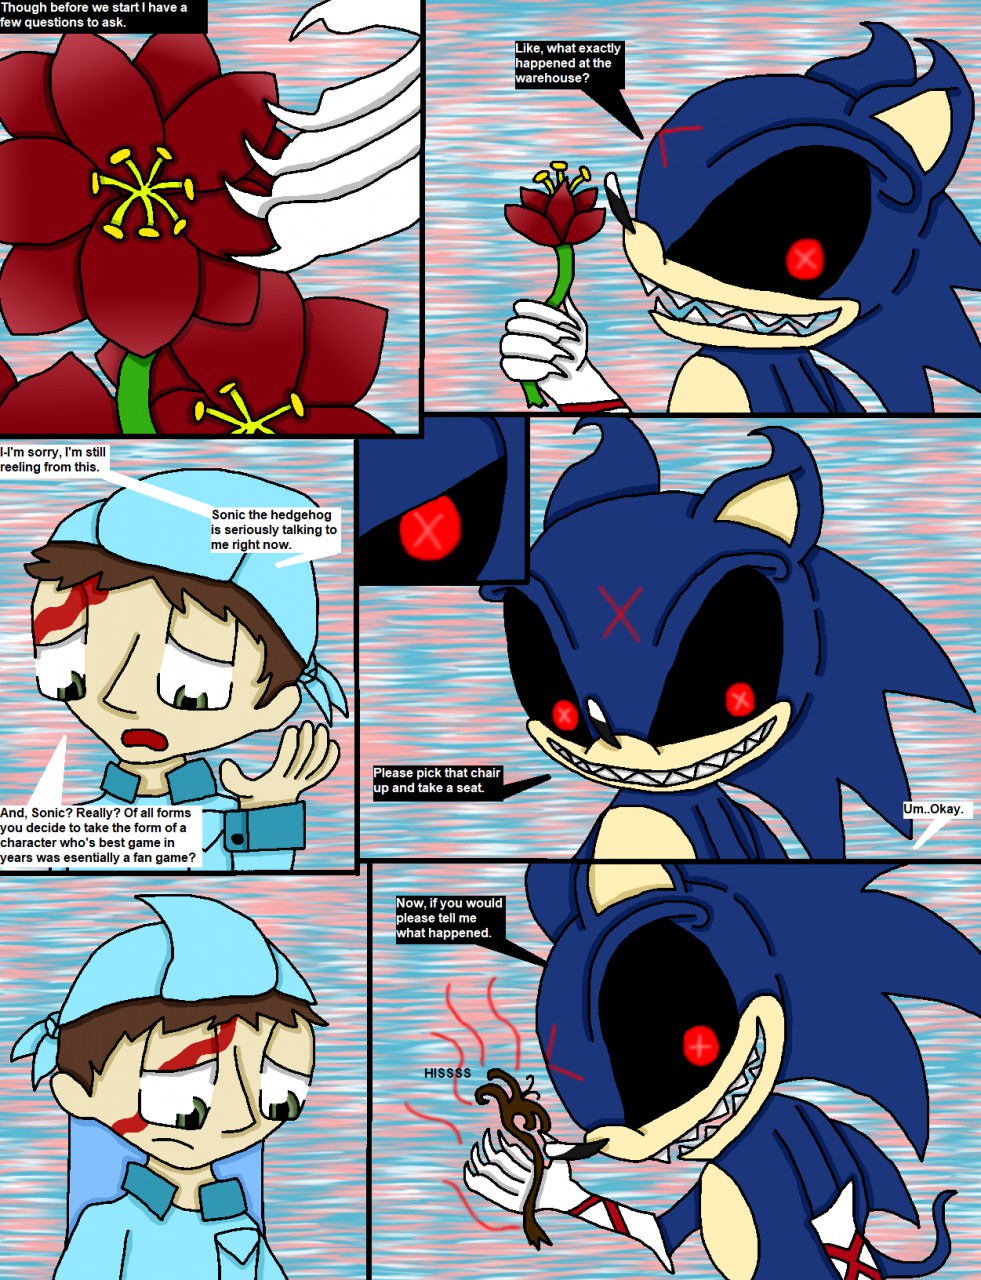 Sonic.EXE All Versions by FishieLemonDude